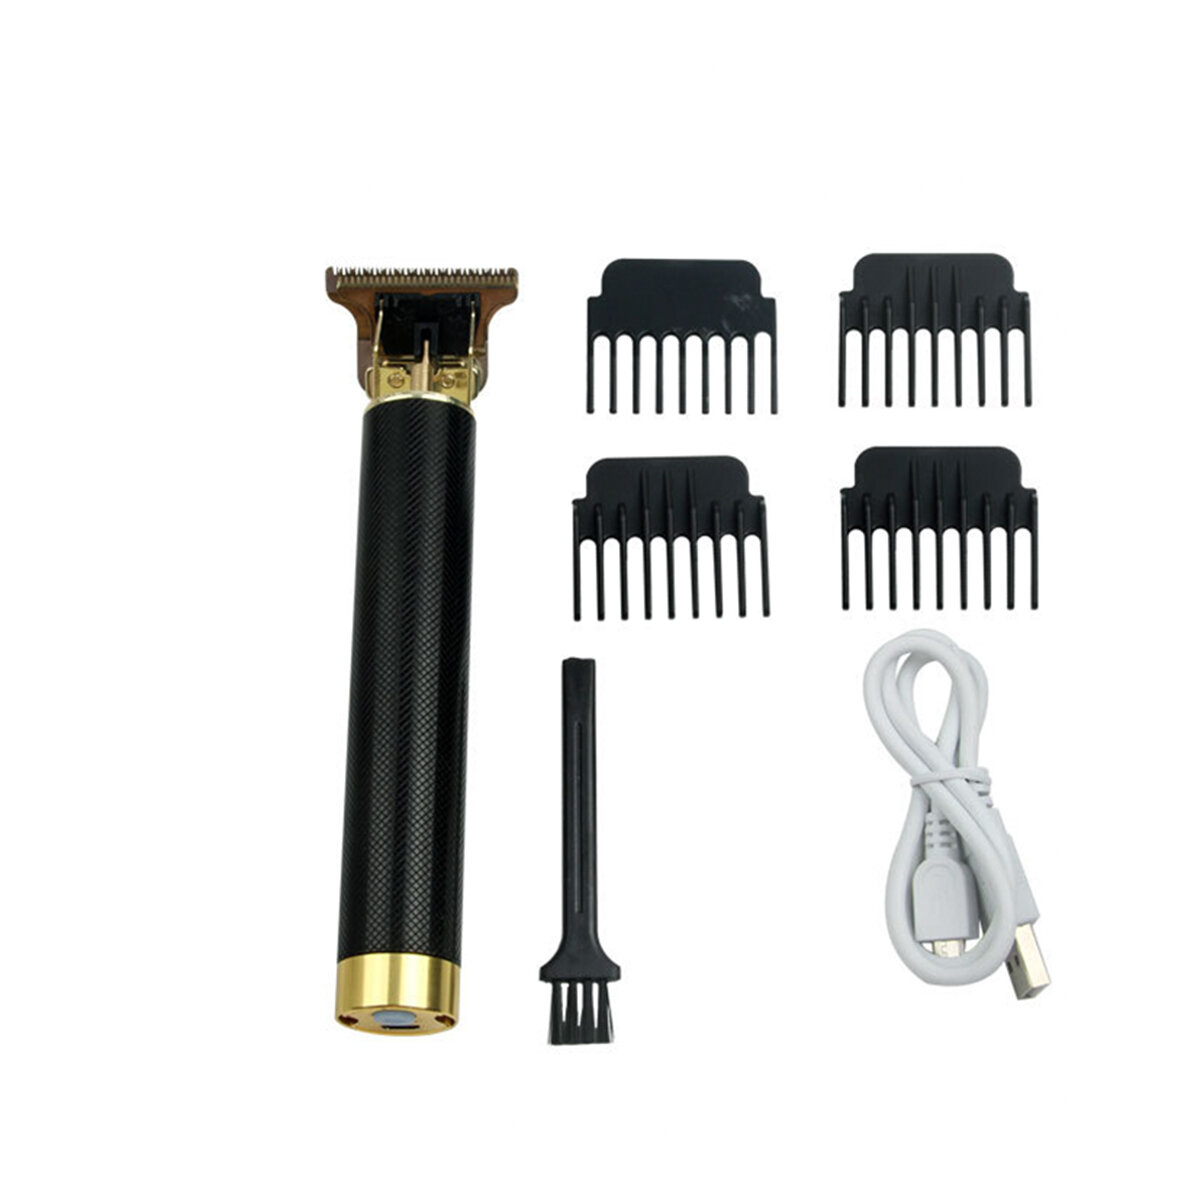 Men's Electric Shaver Kit Low Noise USB Charging Waterproof Hair Chipper Set With 4 Limit Comb